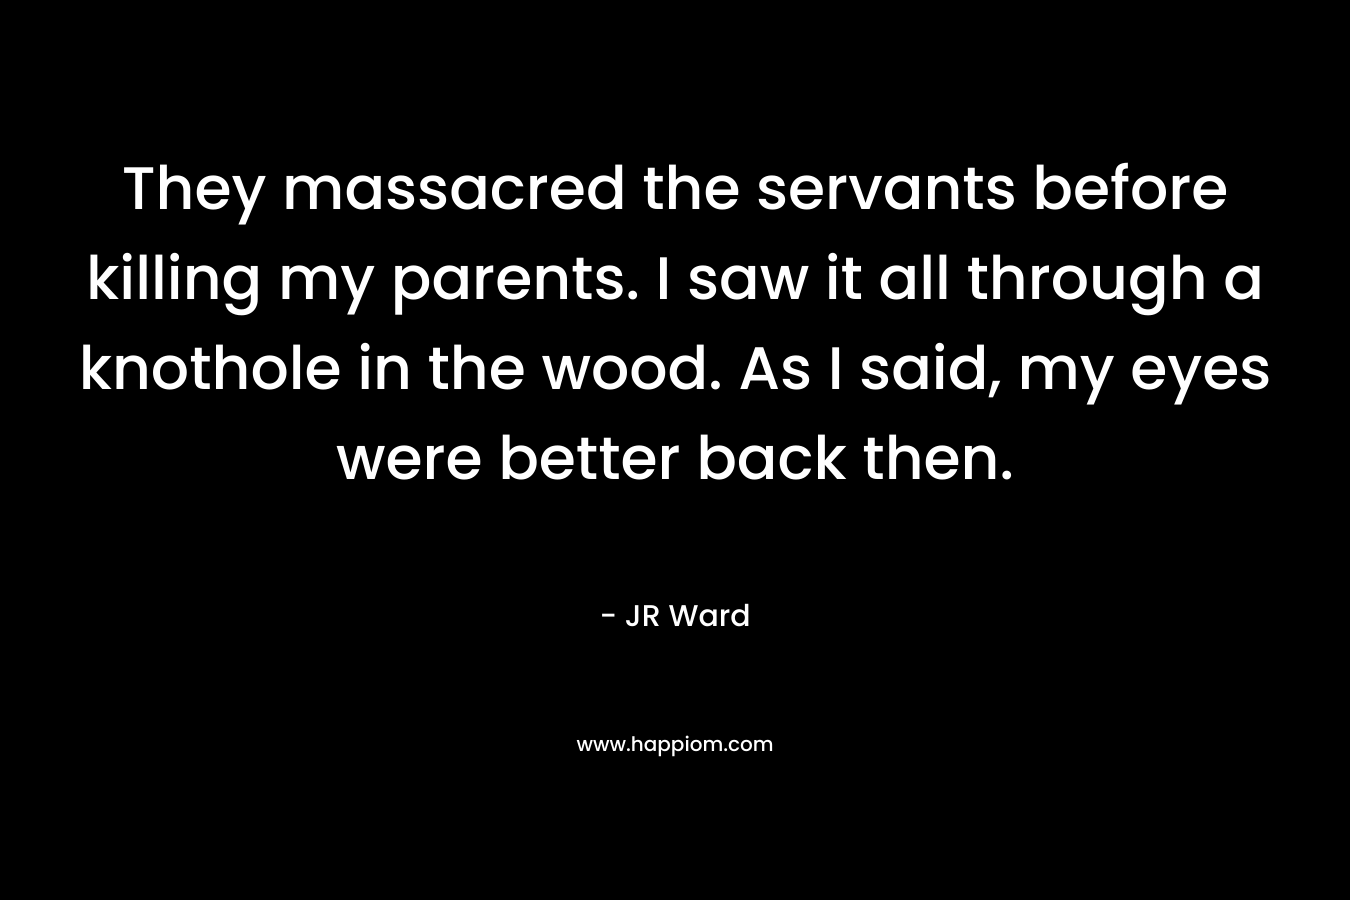 They massacred the servants before killing my parents. I saw it all through a knothole in the wood. As I said, my eyes were better back then.